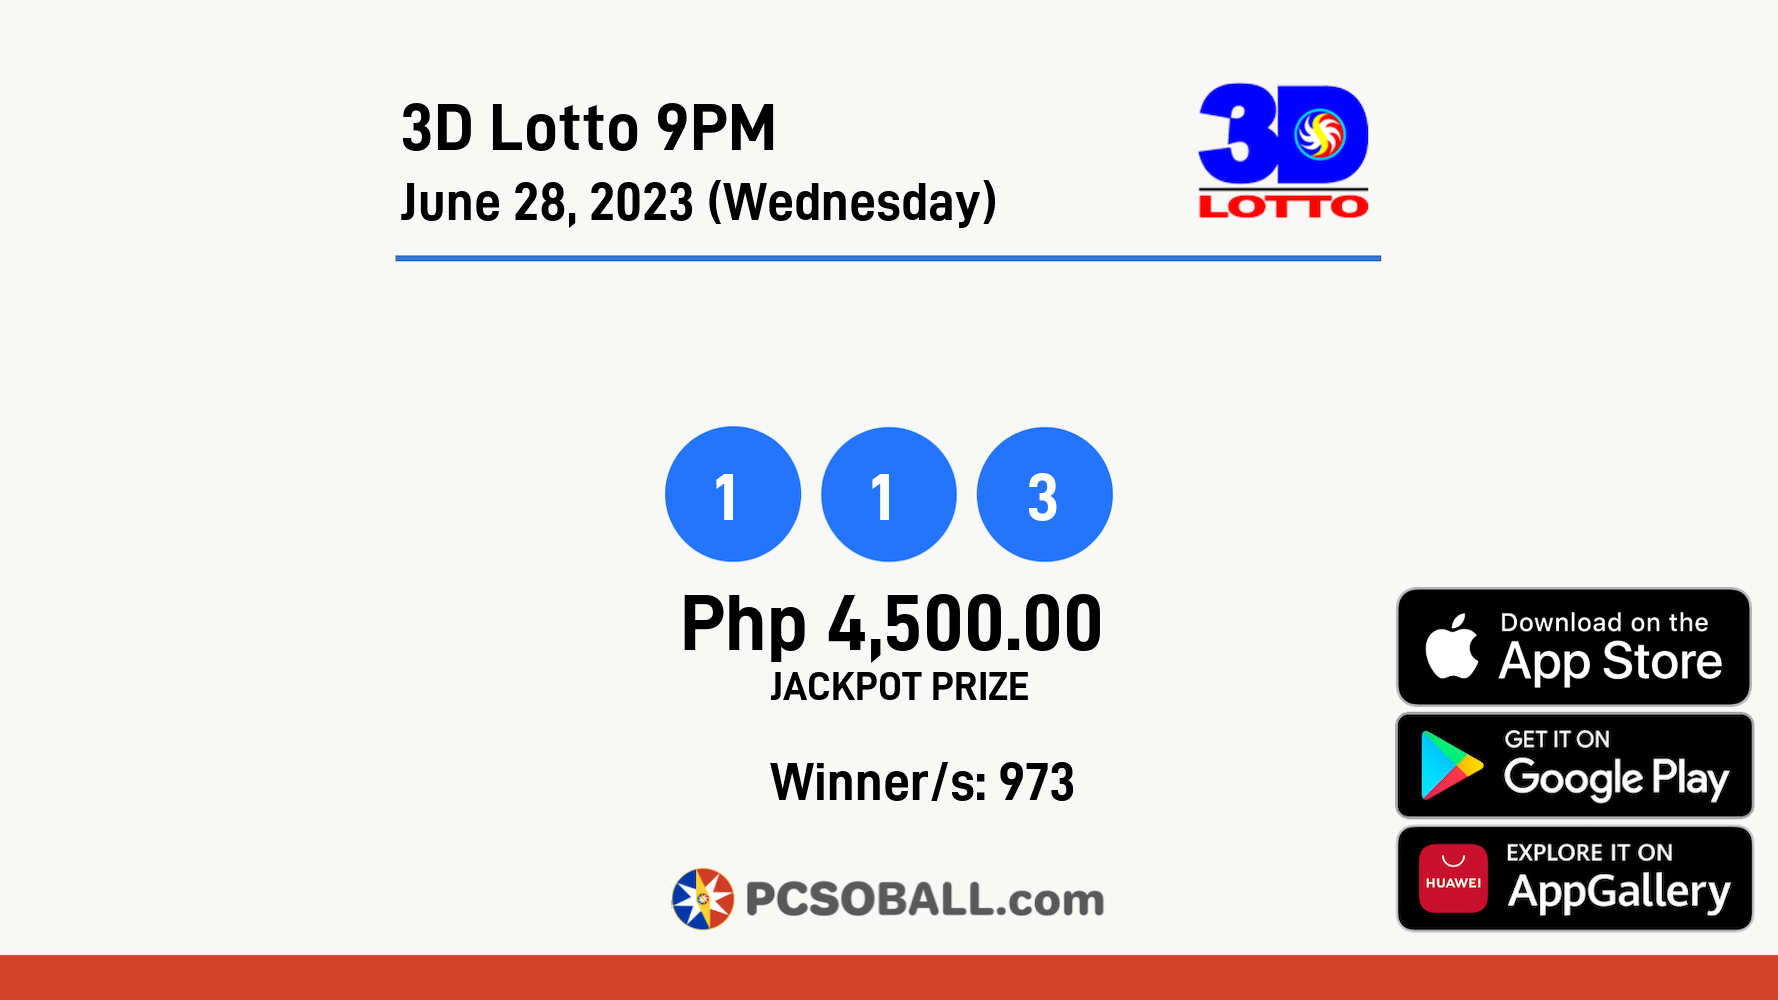 3D Lotto 9PM June 28, 2023 (Wednesday) Result